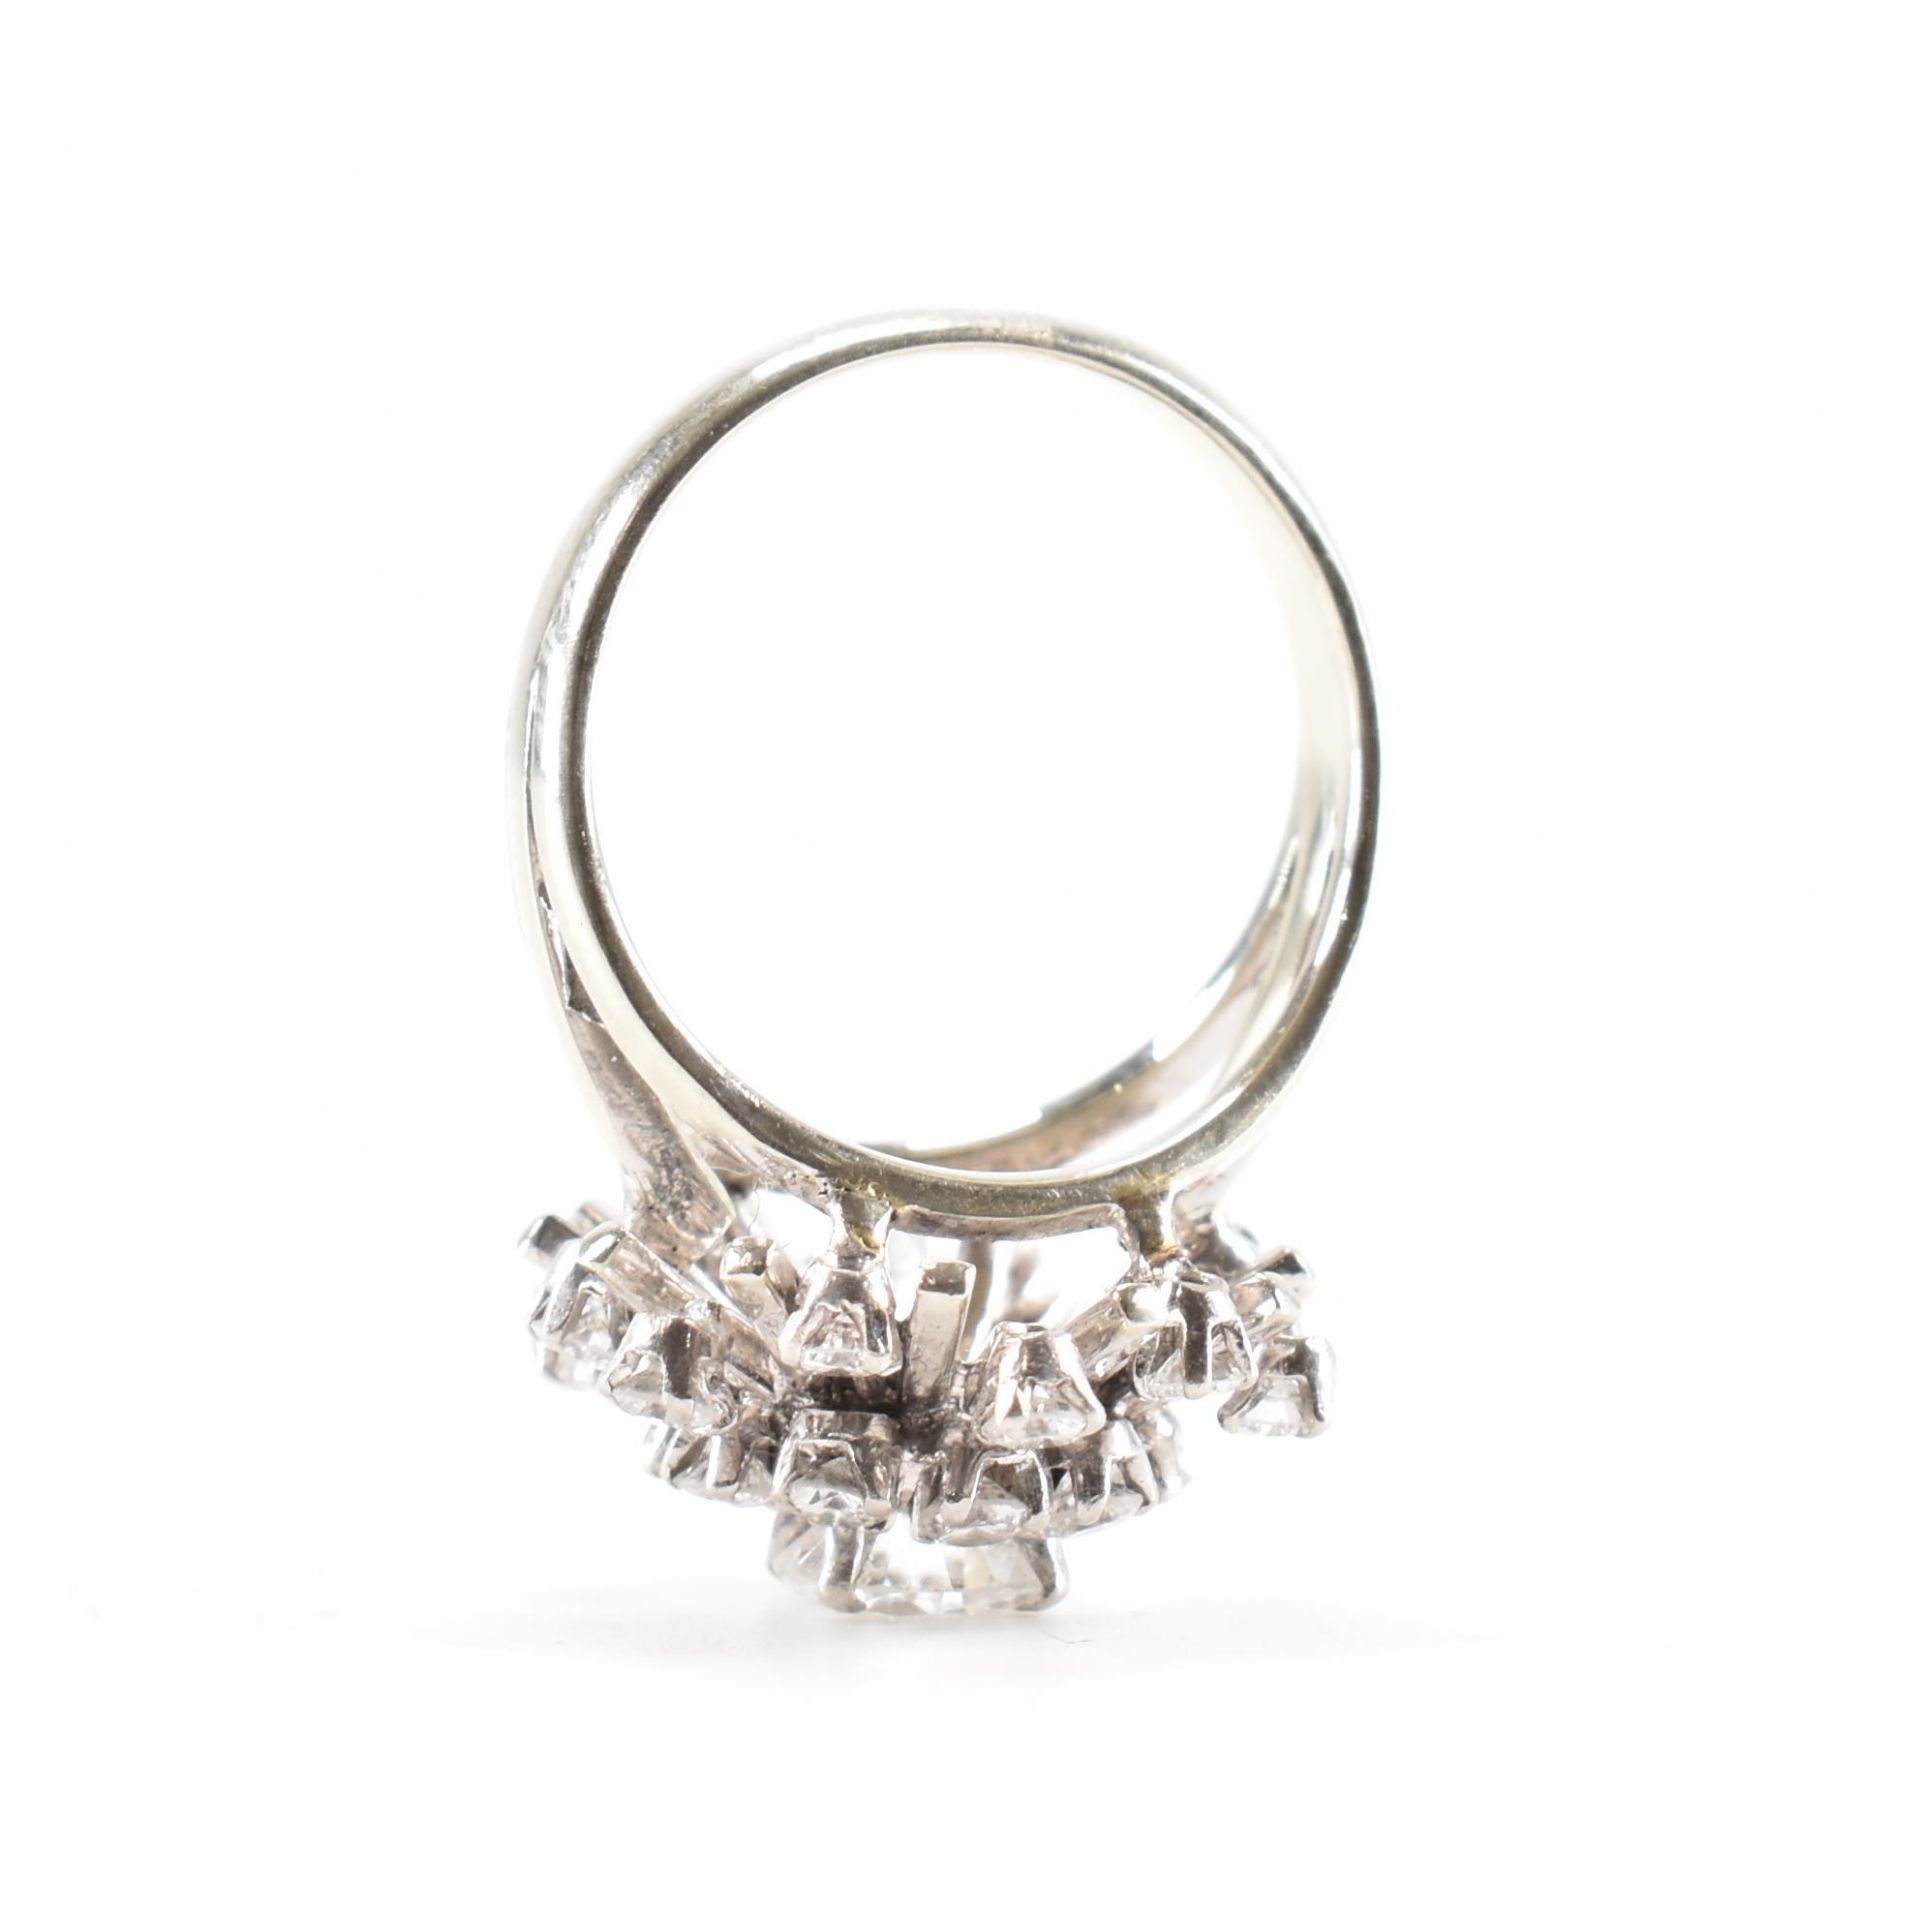 FRENCH 18CT GOLD PLATINUM & DIAMOND CLUSTER RING - Image 7 of 9